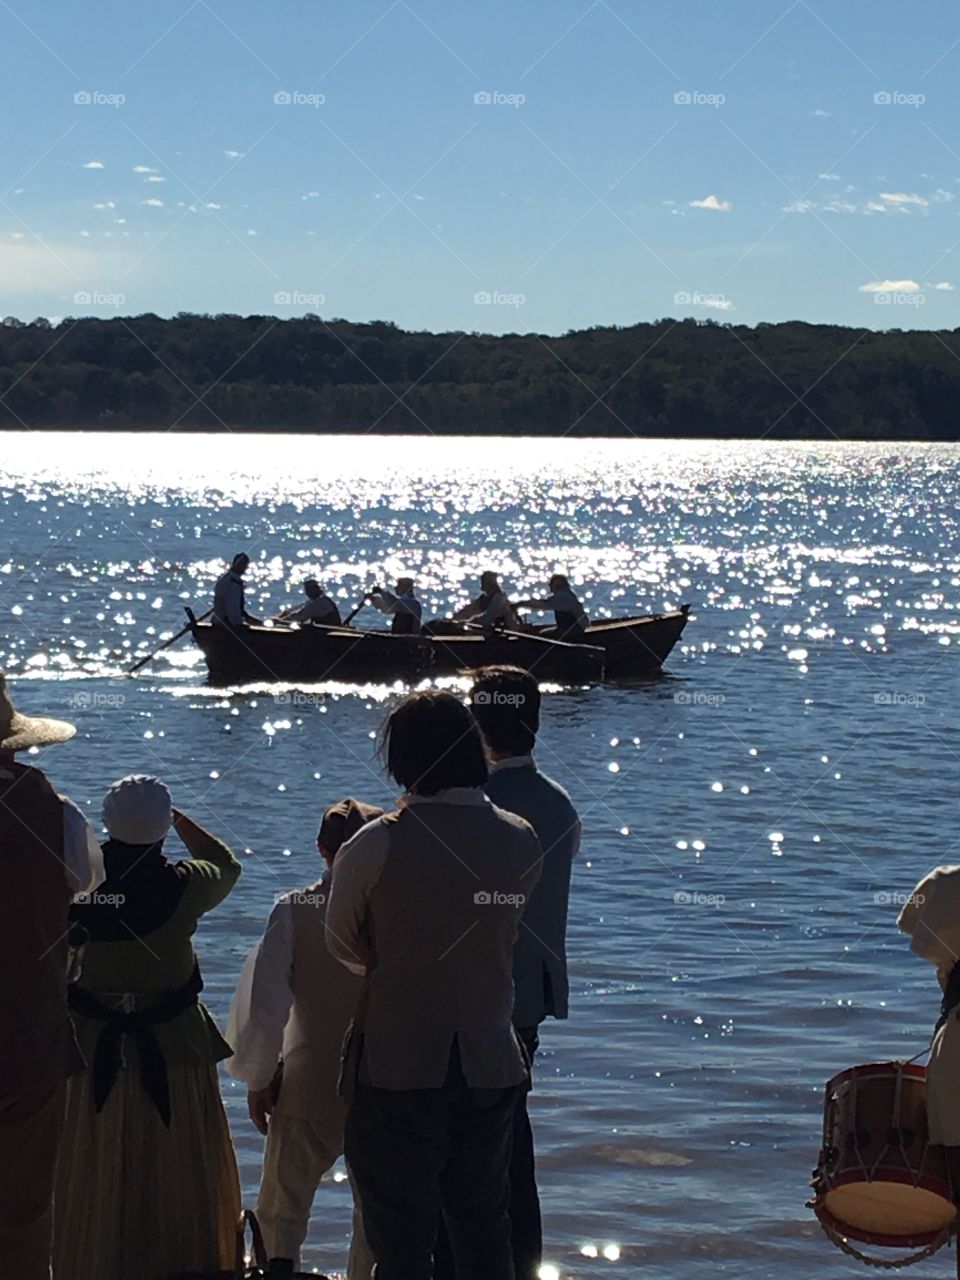 A historically accurate, hand-crafted wooden boat, built by the Living History artists of Mount Vernon, meets the waters of the Potomac for the first time.